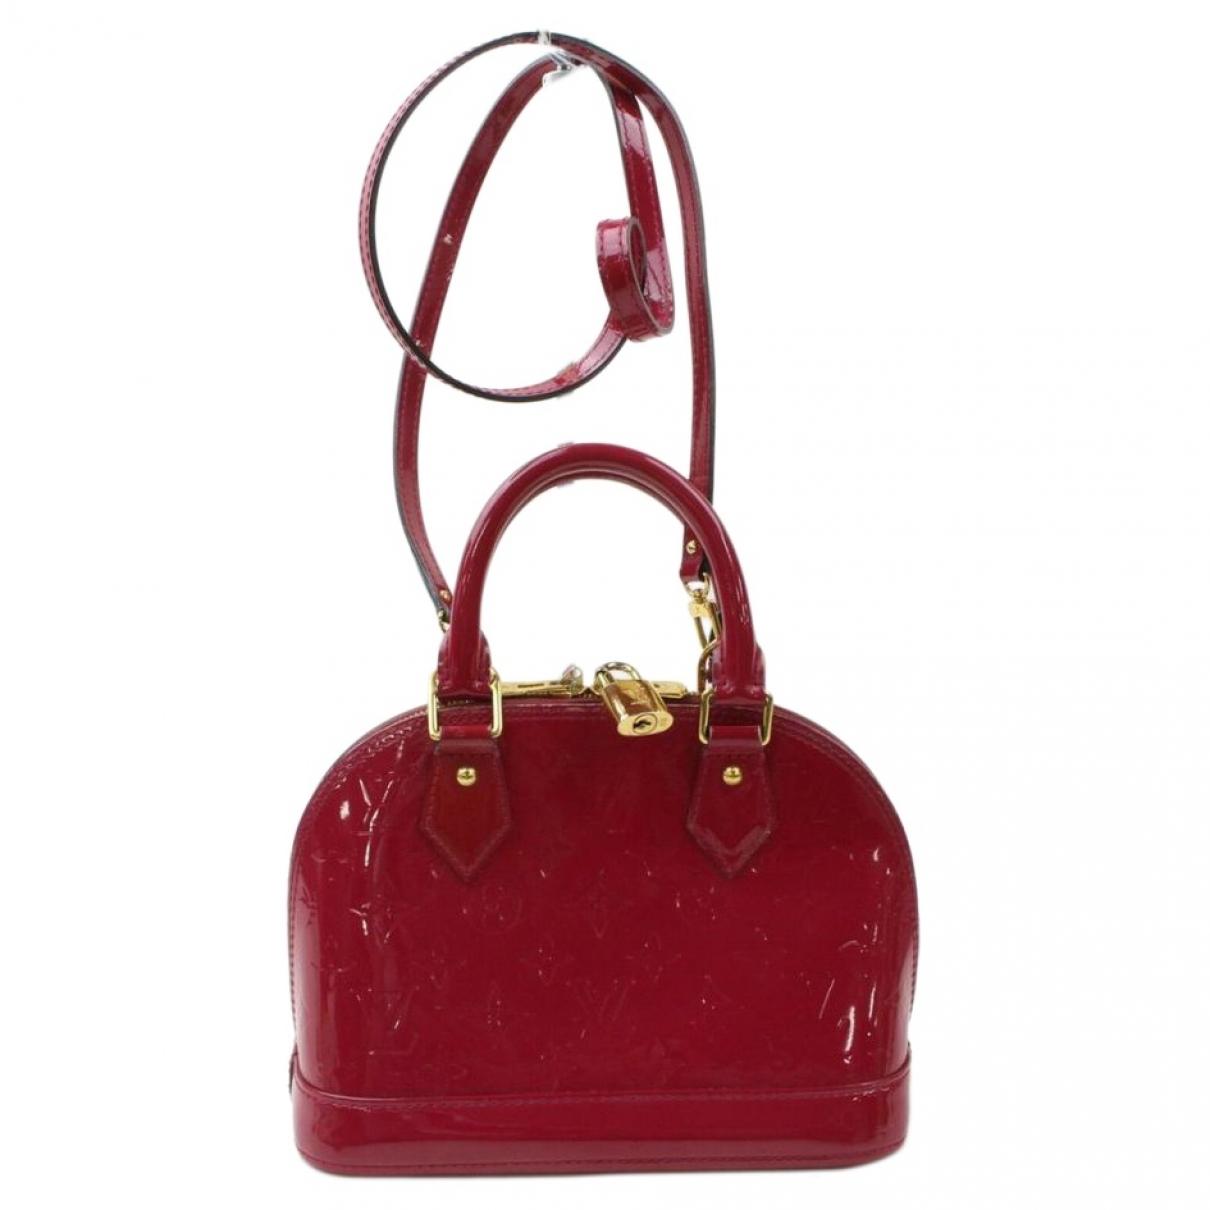 Lyst - Louis Vuitton Patent Leather Crossbody Bag in Red